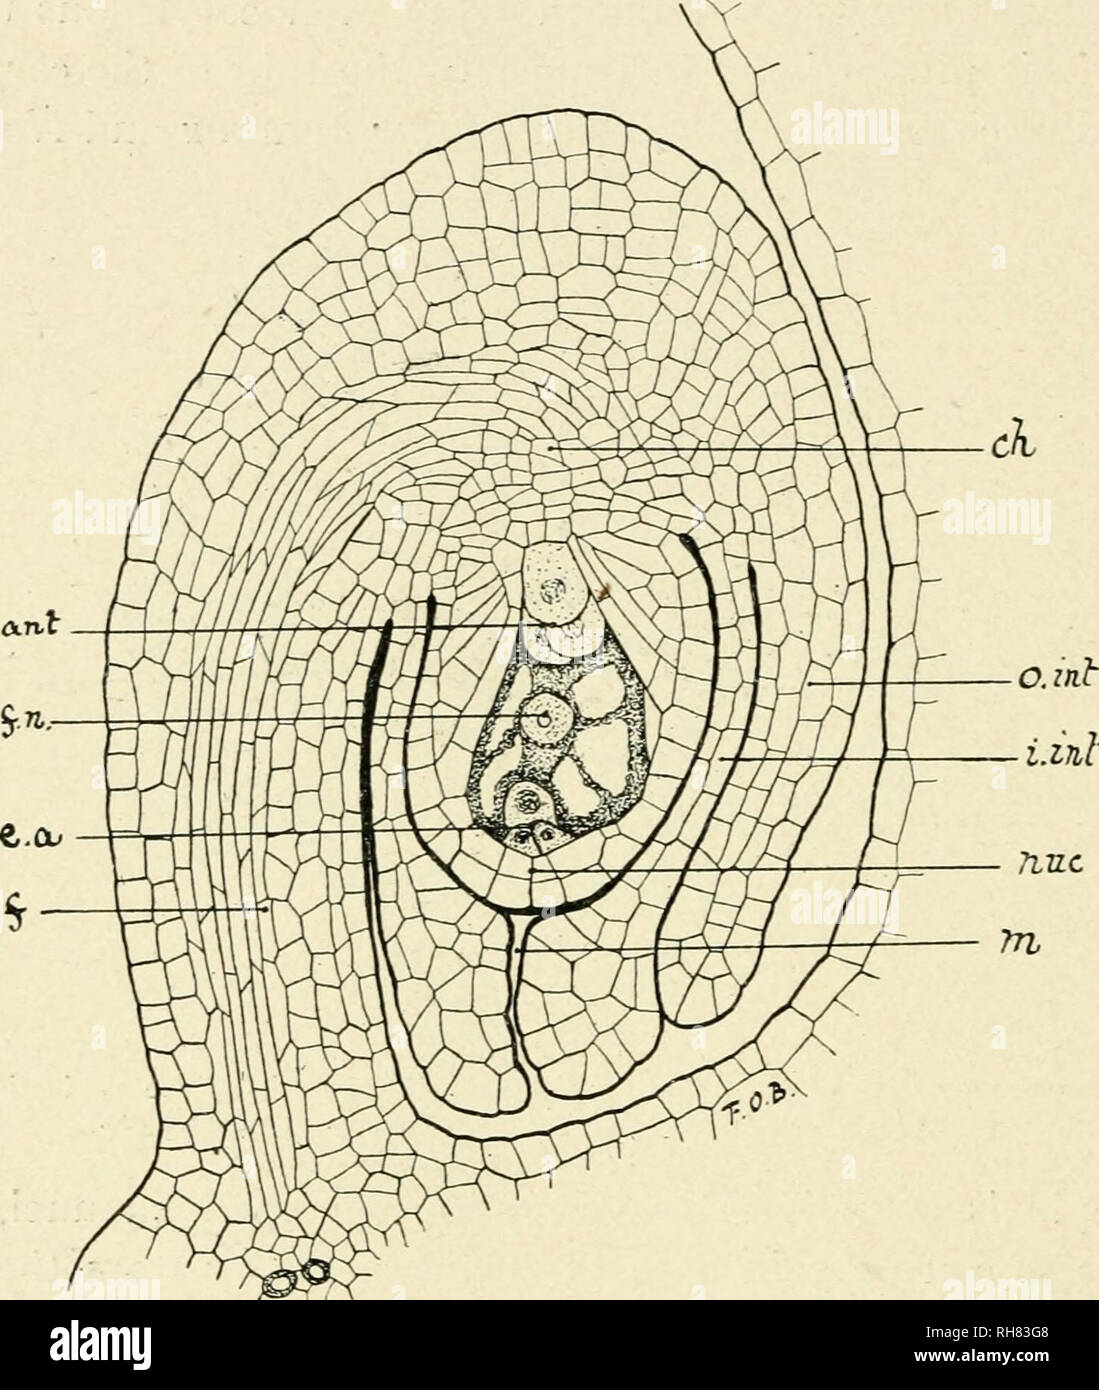 . Botany of the living plant. Botany. 25^ BOTANY OF THE LIVING PLANT The ovule at the period when it is ready for fertihsation is more or less oval in form, and it is seated upon a stalk, the funiculus, which is usually short (Fig. 206). It consists of a central body of conical form, which is called-the nucellus. This is the actual mega-sporangium. It is invested by one, and frequently by two integuments^ which are attached to its base, and cover it closely, leaving only a very narrow channel. Fig. 206. Median longitudinal section of an ovule of Caltha, at the period of fertilisation. /=funicu Stock Photo